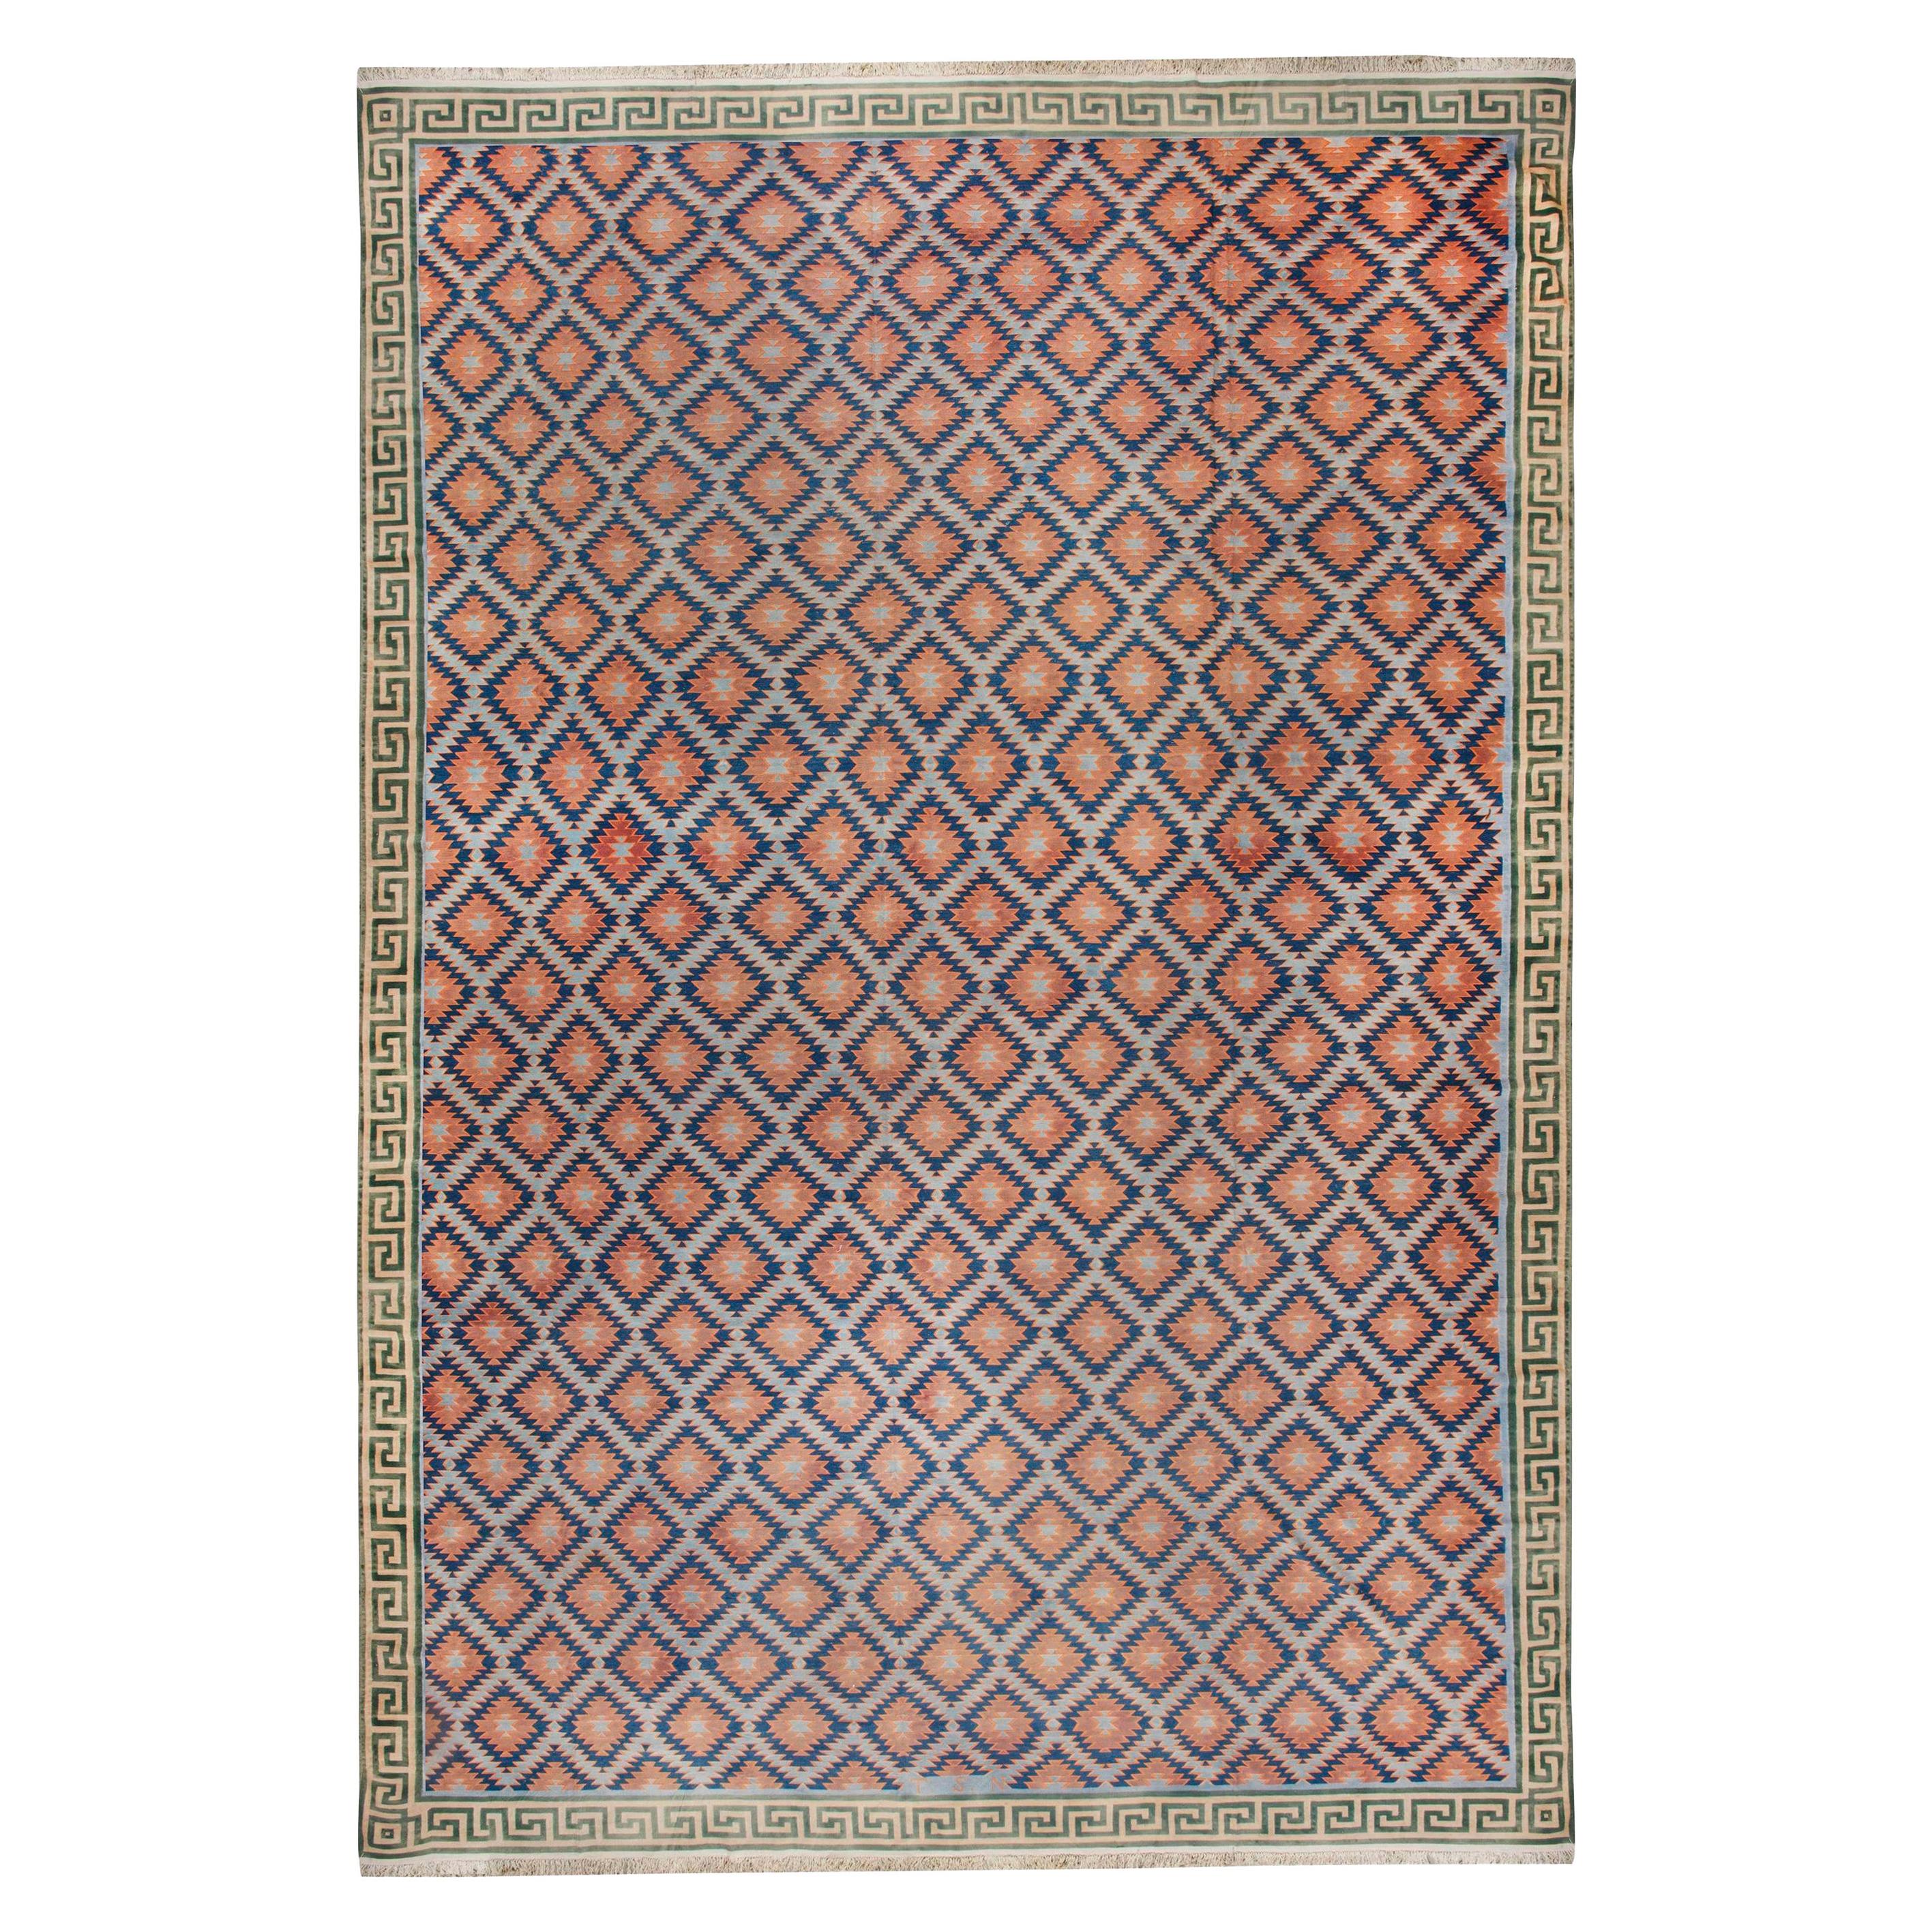 Oversized Midcentury Indian Dhurrie Cotton Rug